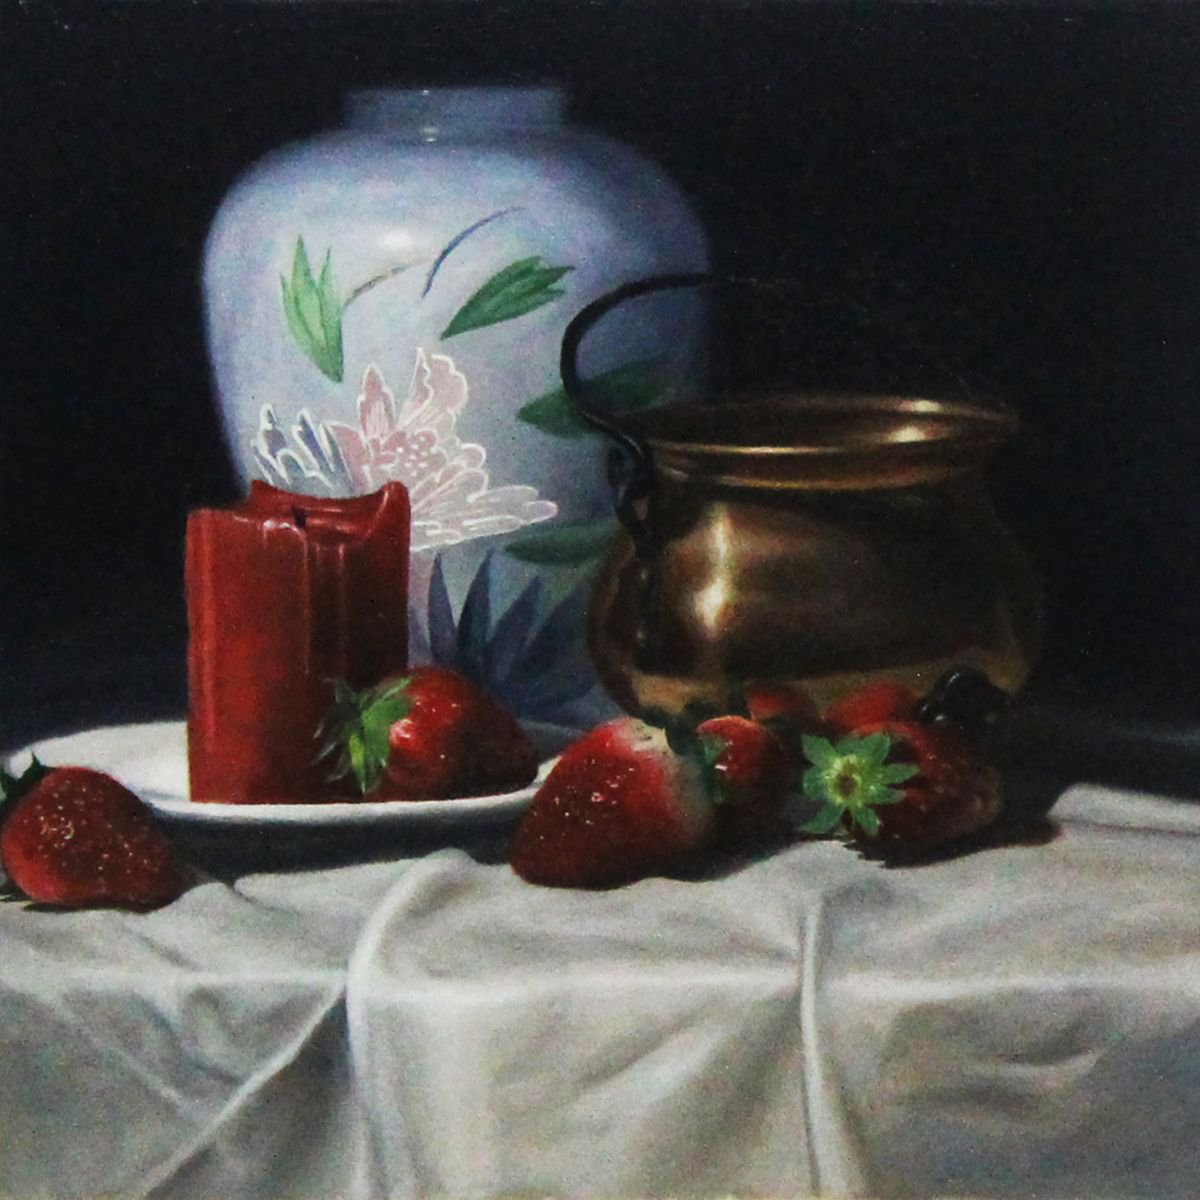 White Vase, Copper Jar, Candle and Strawberries by James Zhao